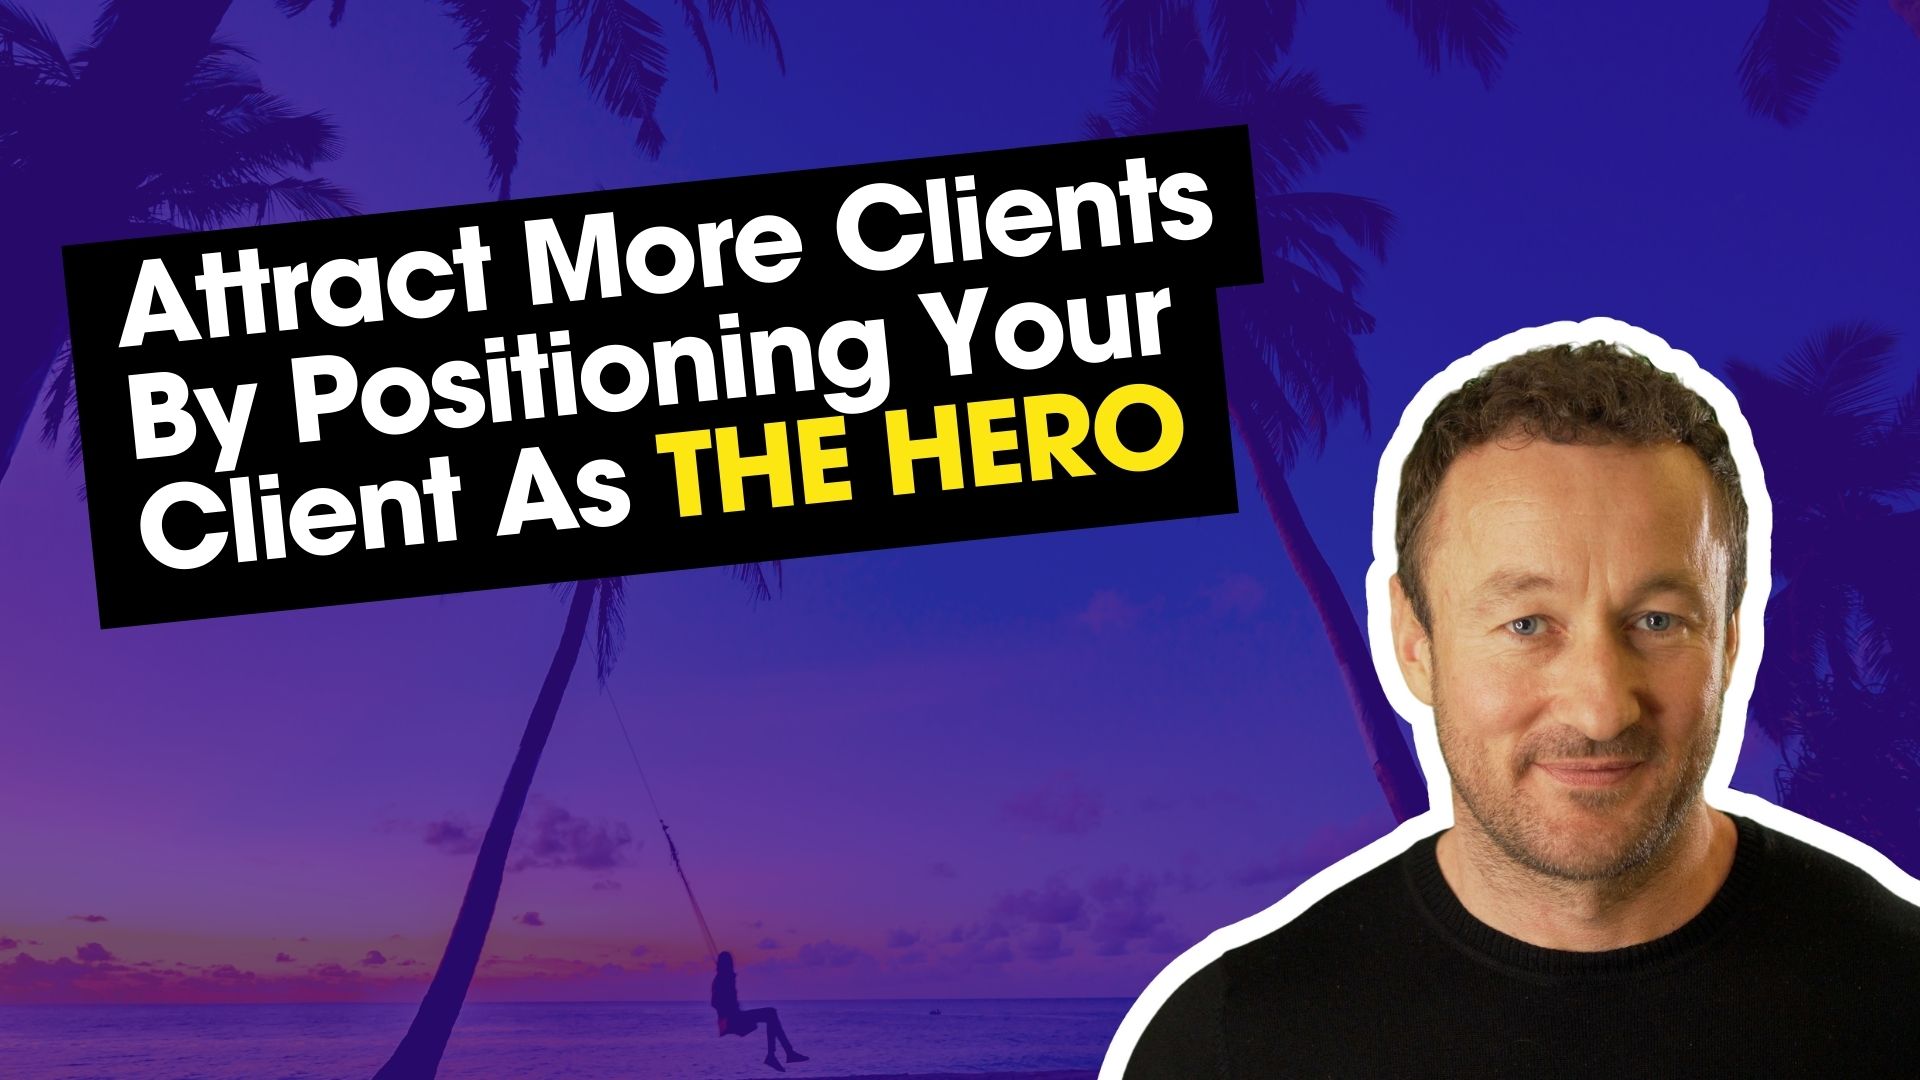 Attract More Clients By Positioning Your Client As The Hero